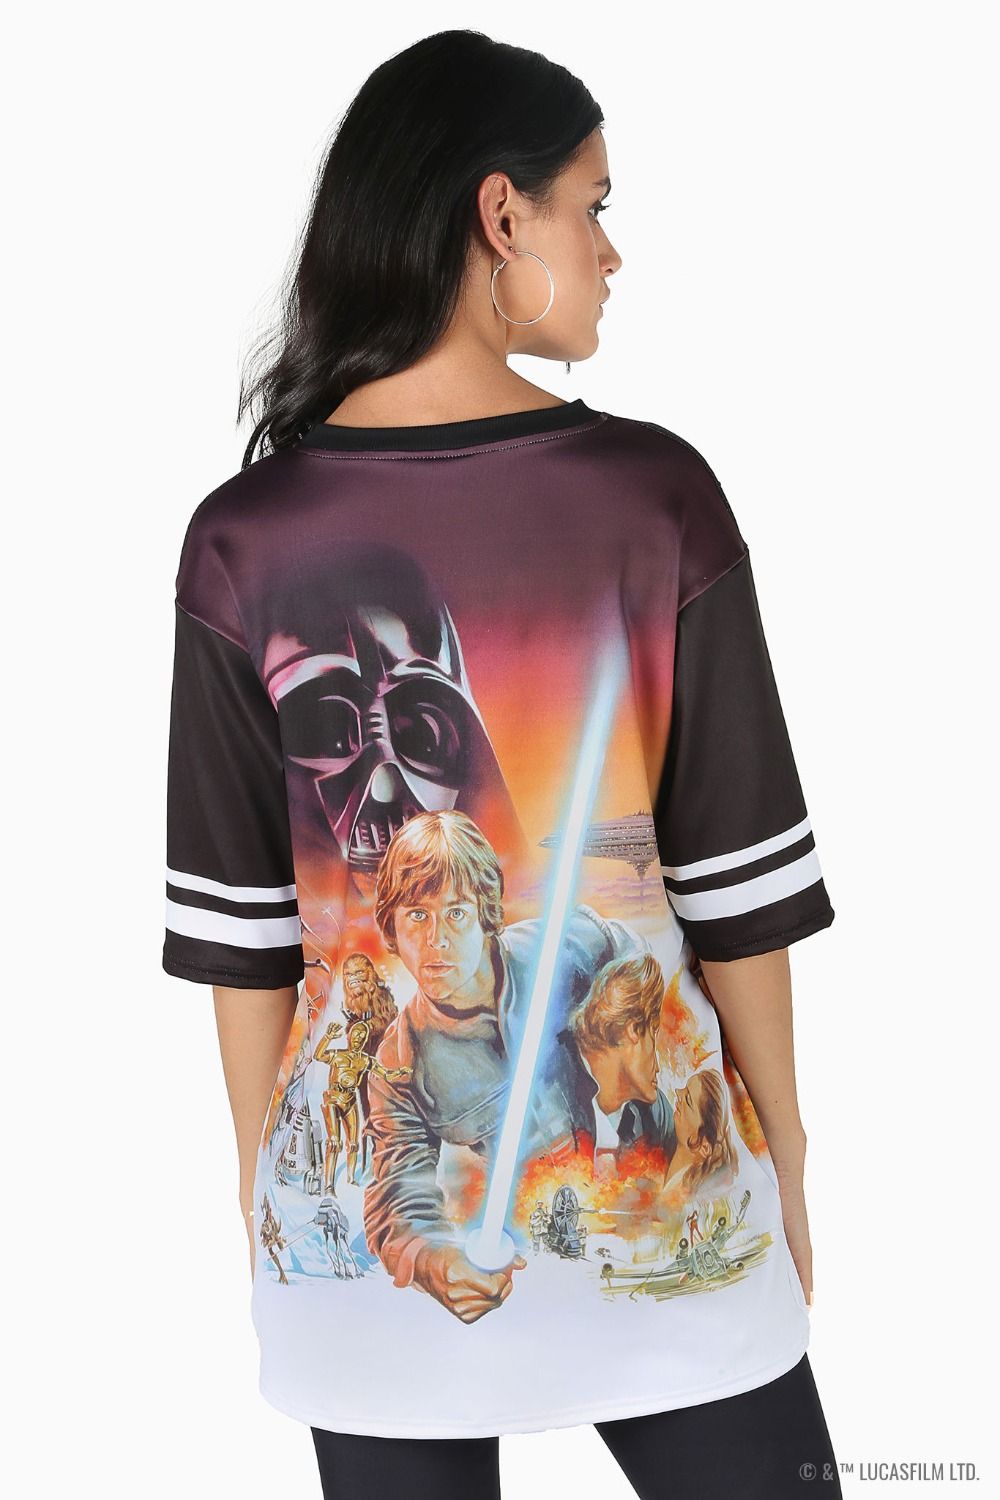 Black Milk Clothing x Star Wars A Long Time Ago Touchdown Athletic Top